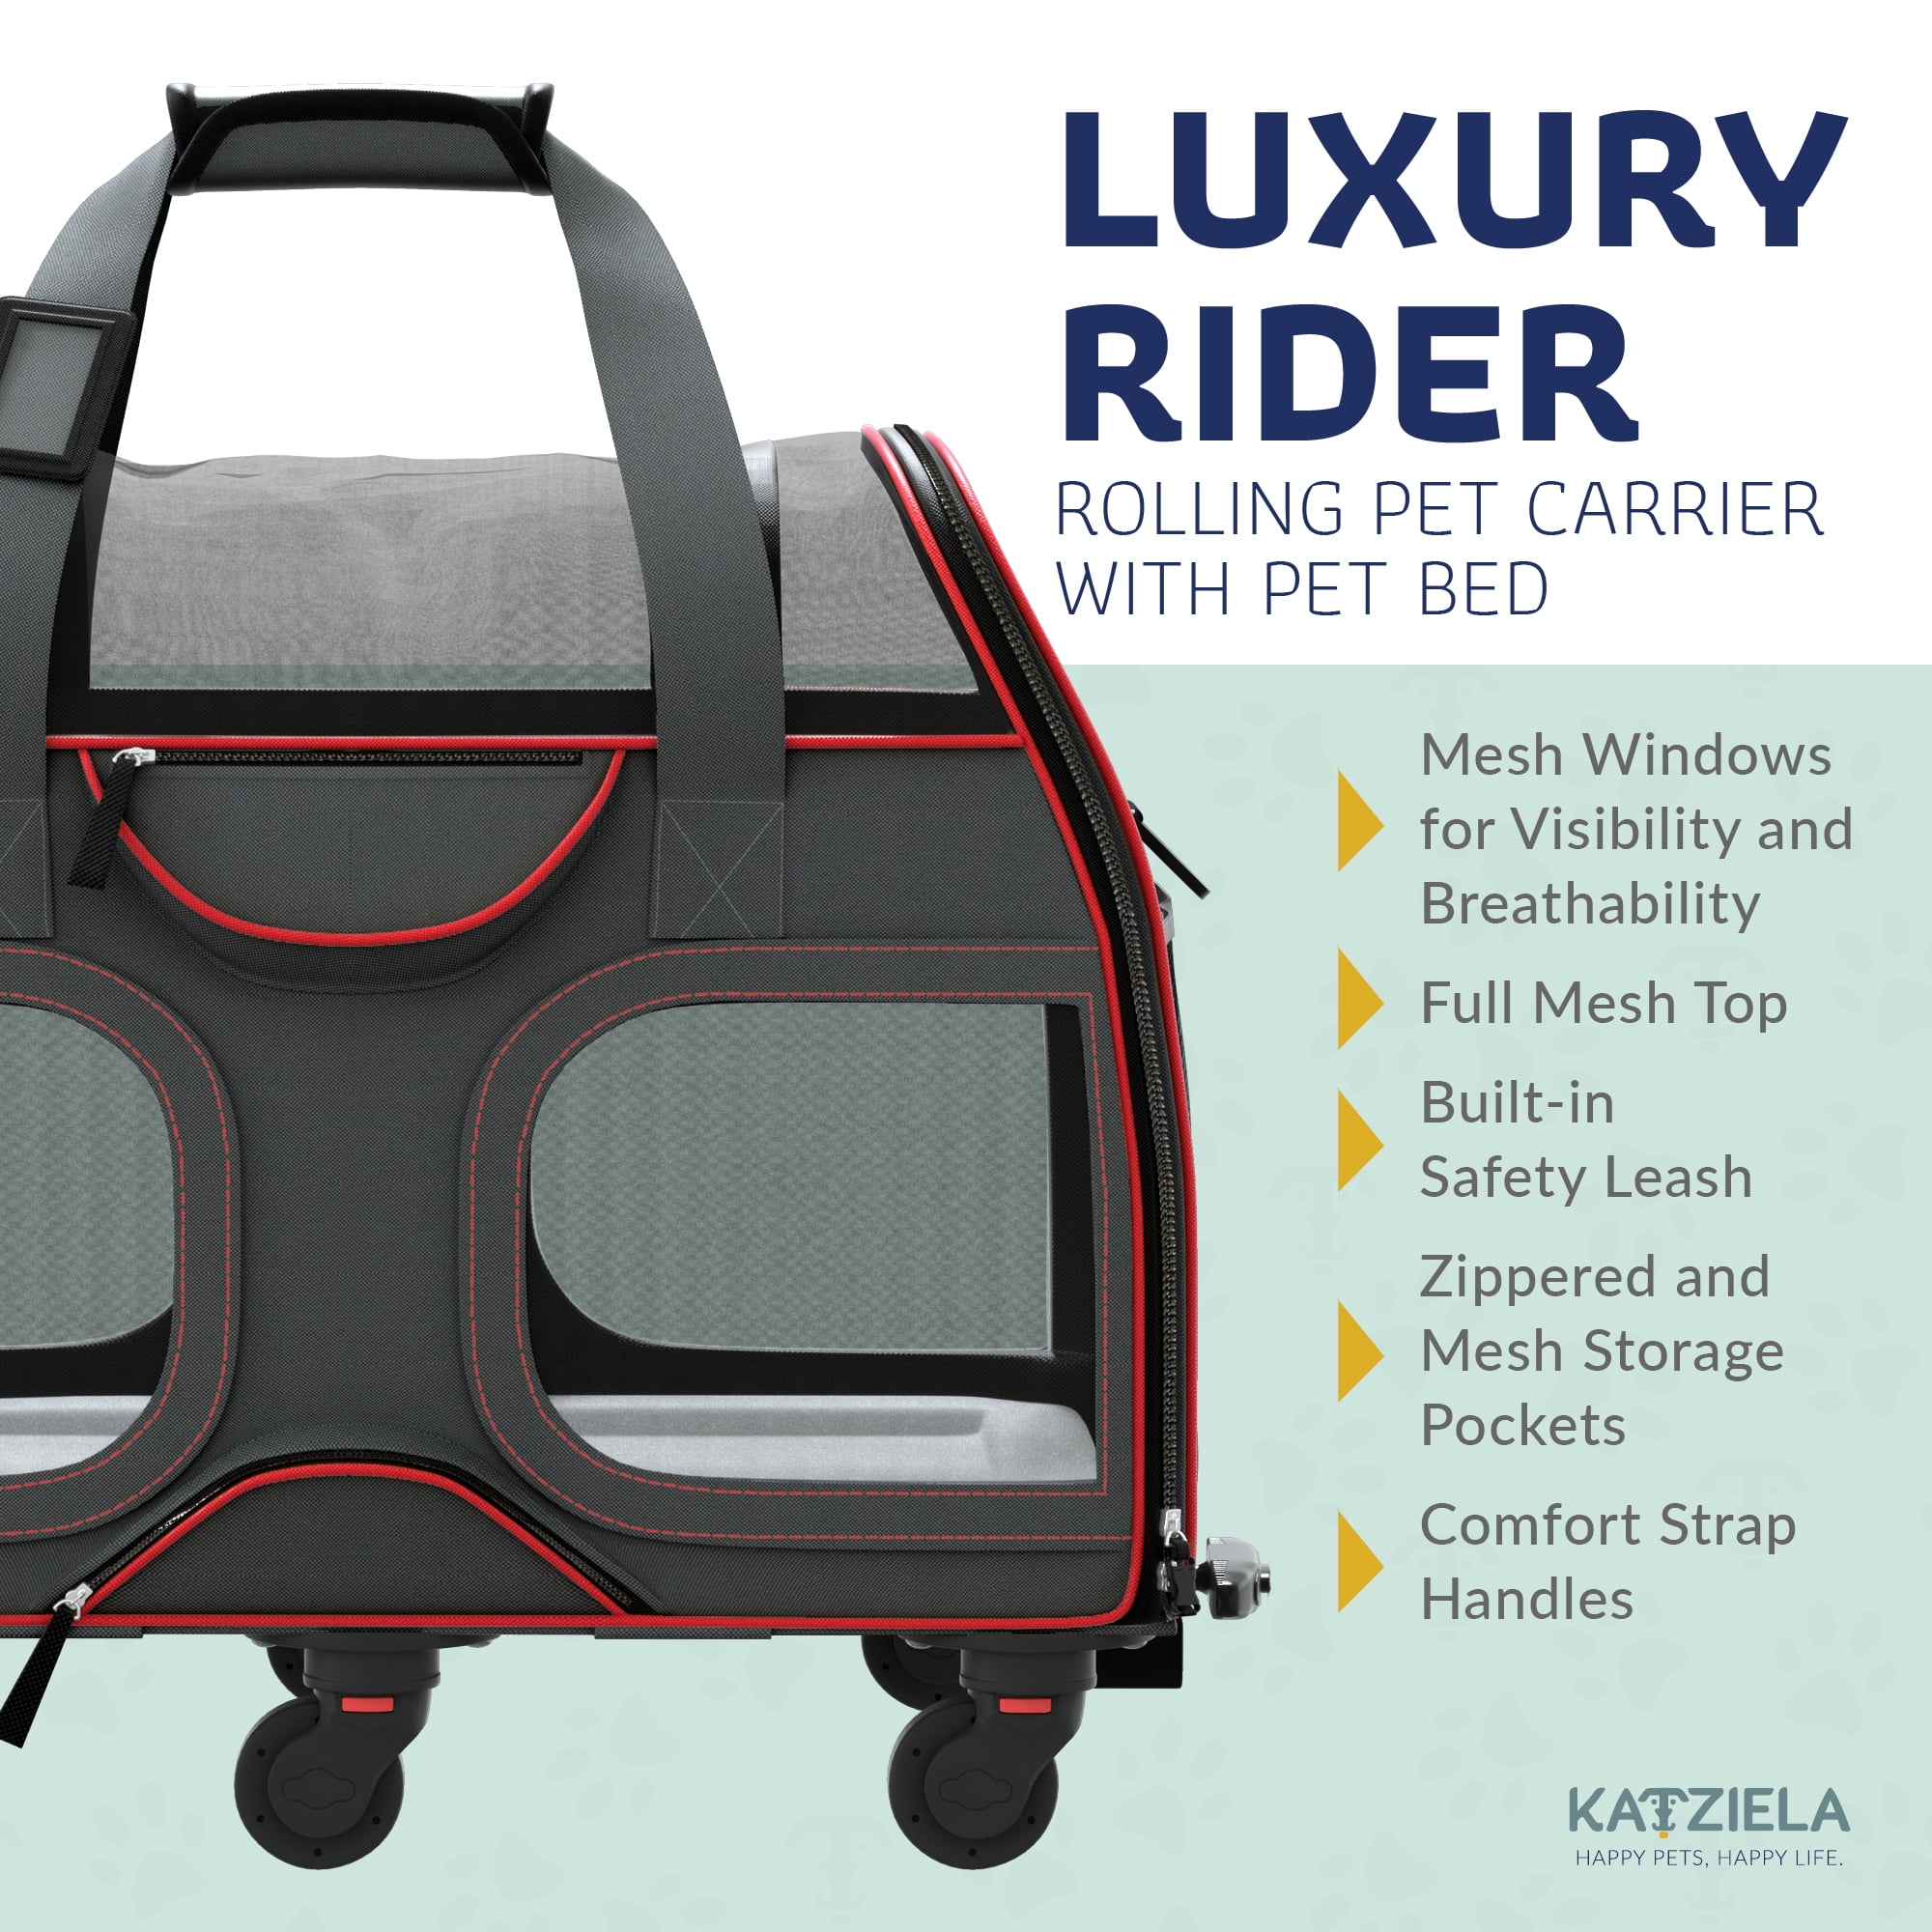 Katziela Pet Carrier - Airline Approved - TSA Approved Pet Carrier for  Small Dogs and Cats - Soft FAA Travel Airplane Dog Carrier Luggage  (Black/Red)